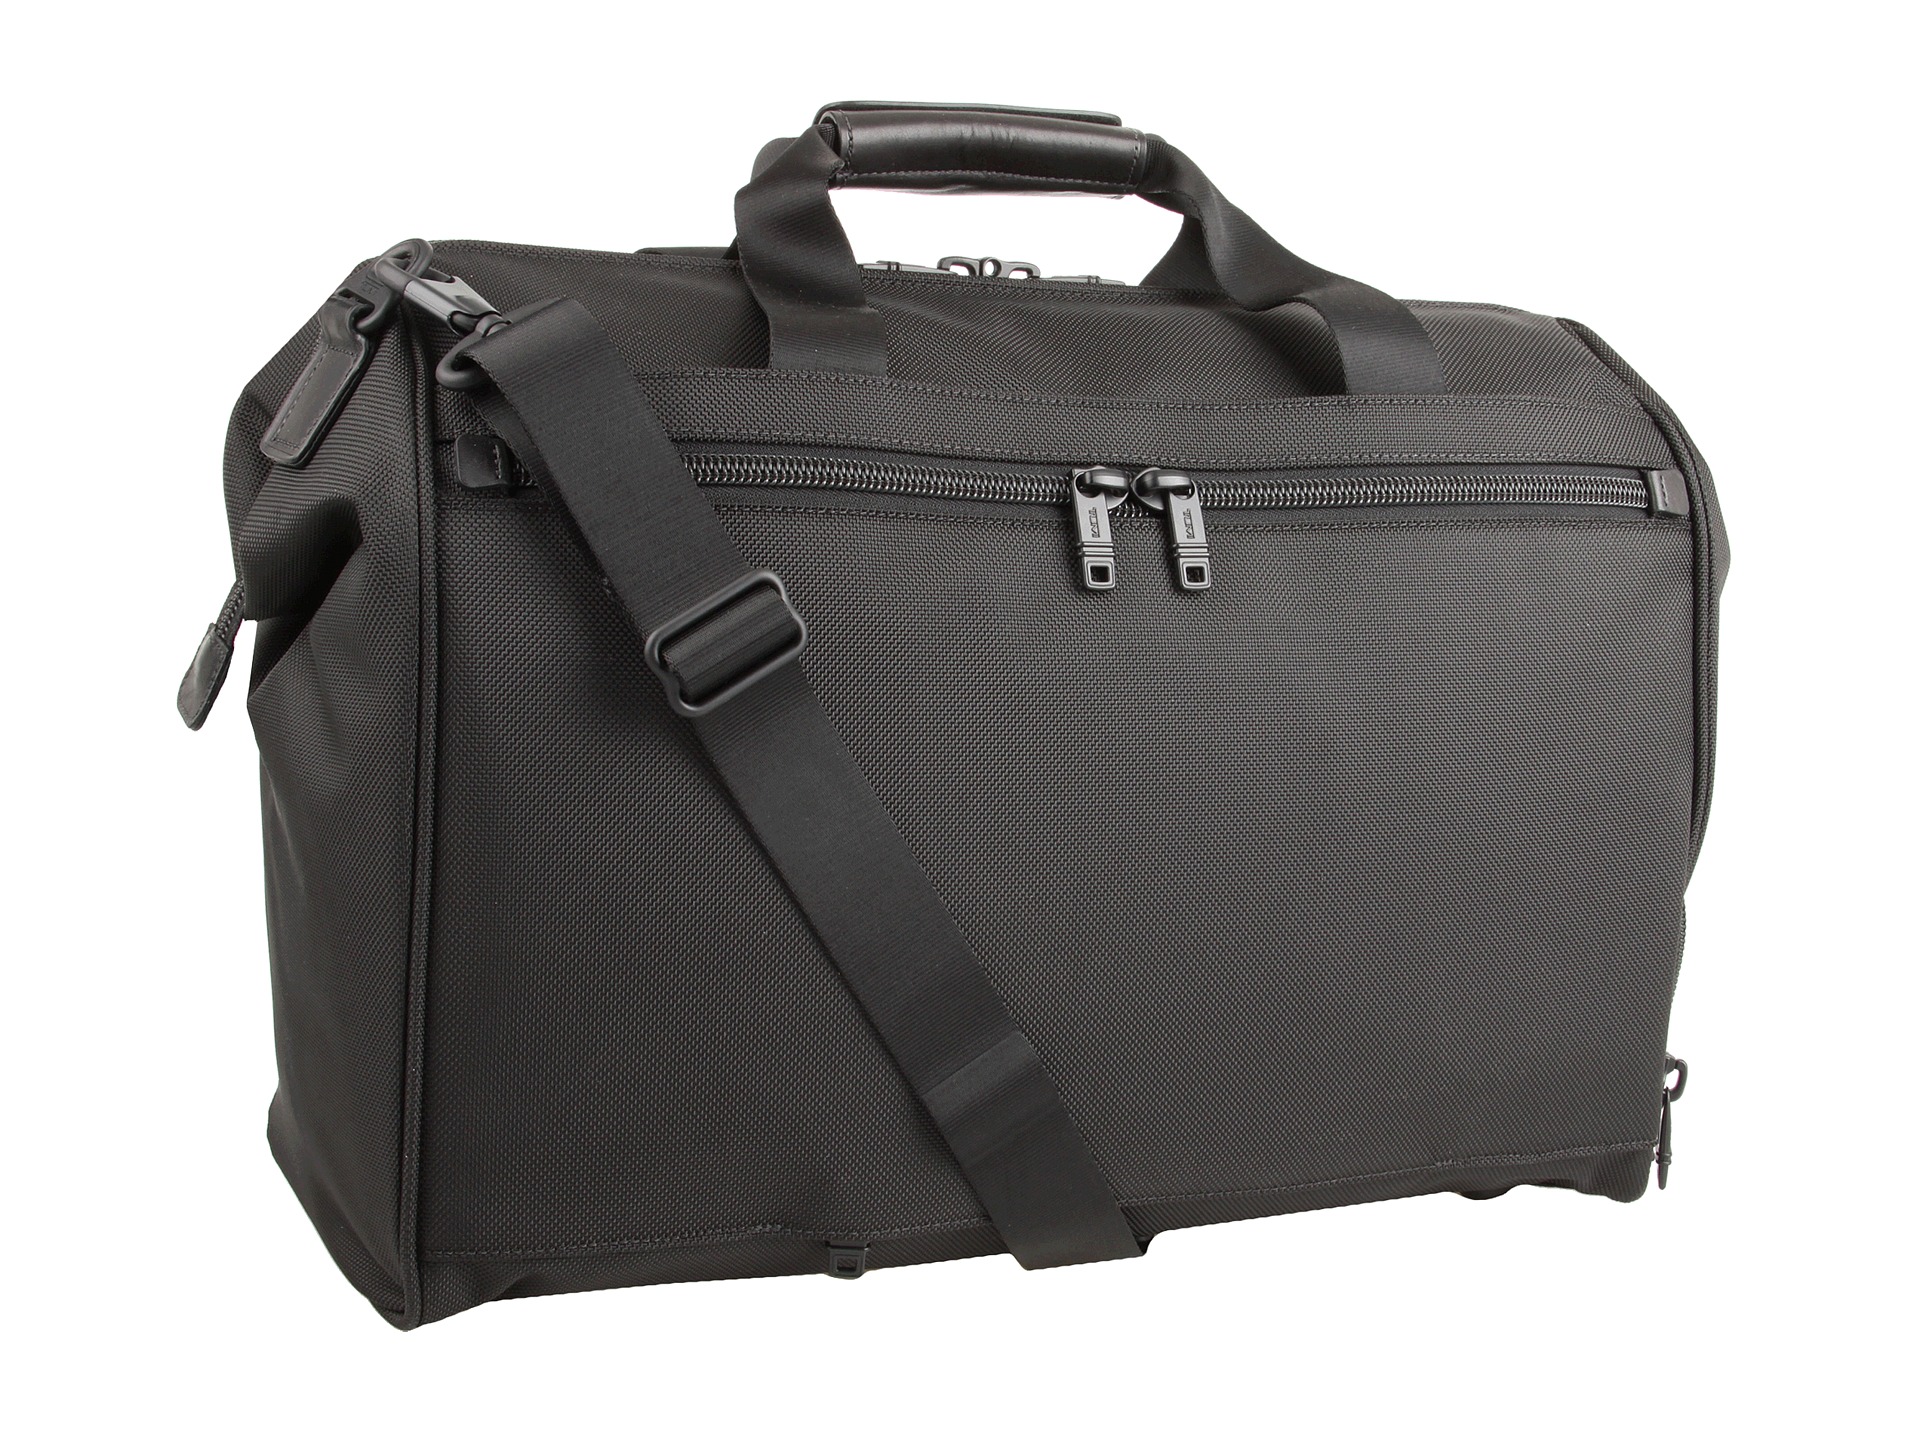 Tumi Alpha Deluxe Carry On Satchel | Shipped Free at Zappos